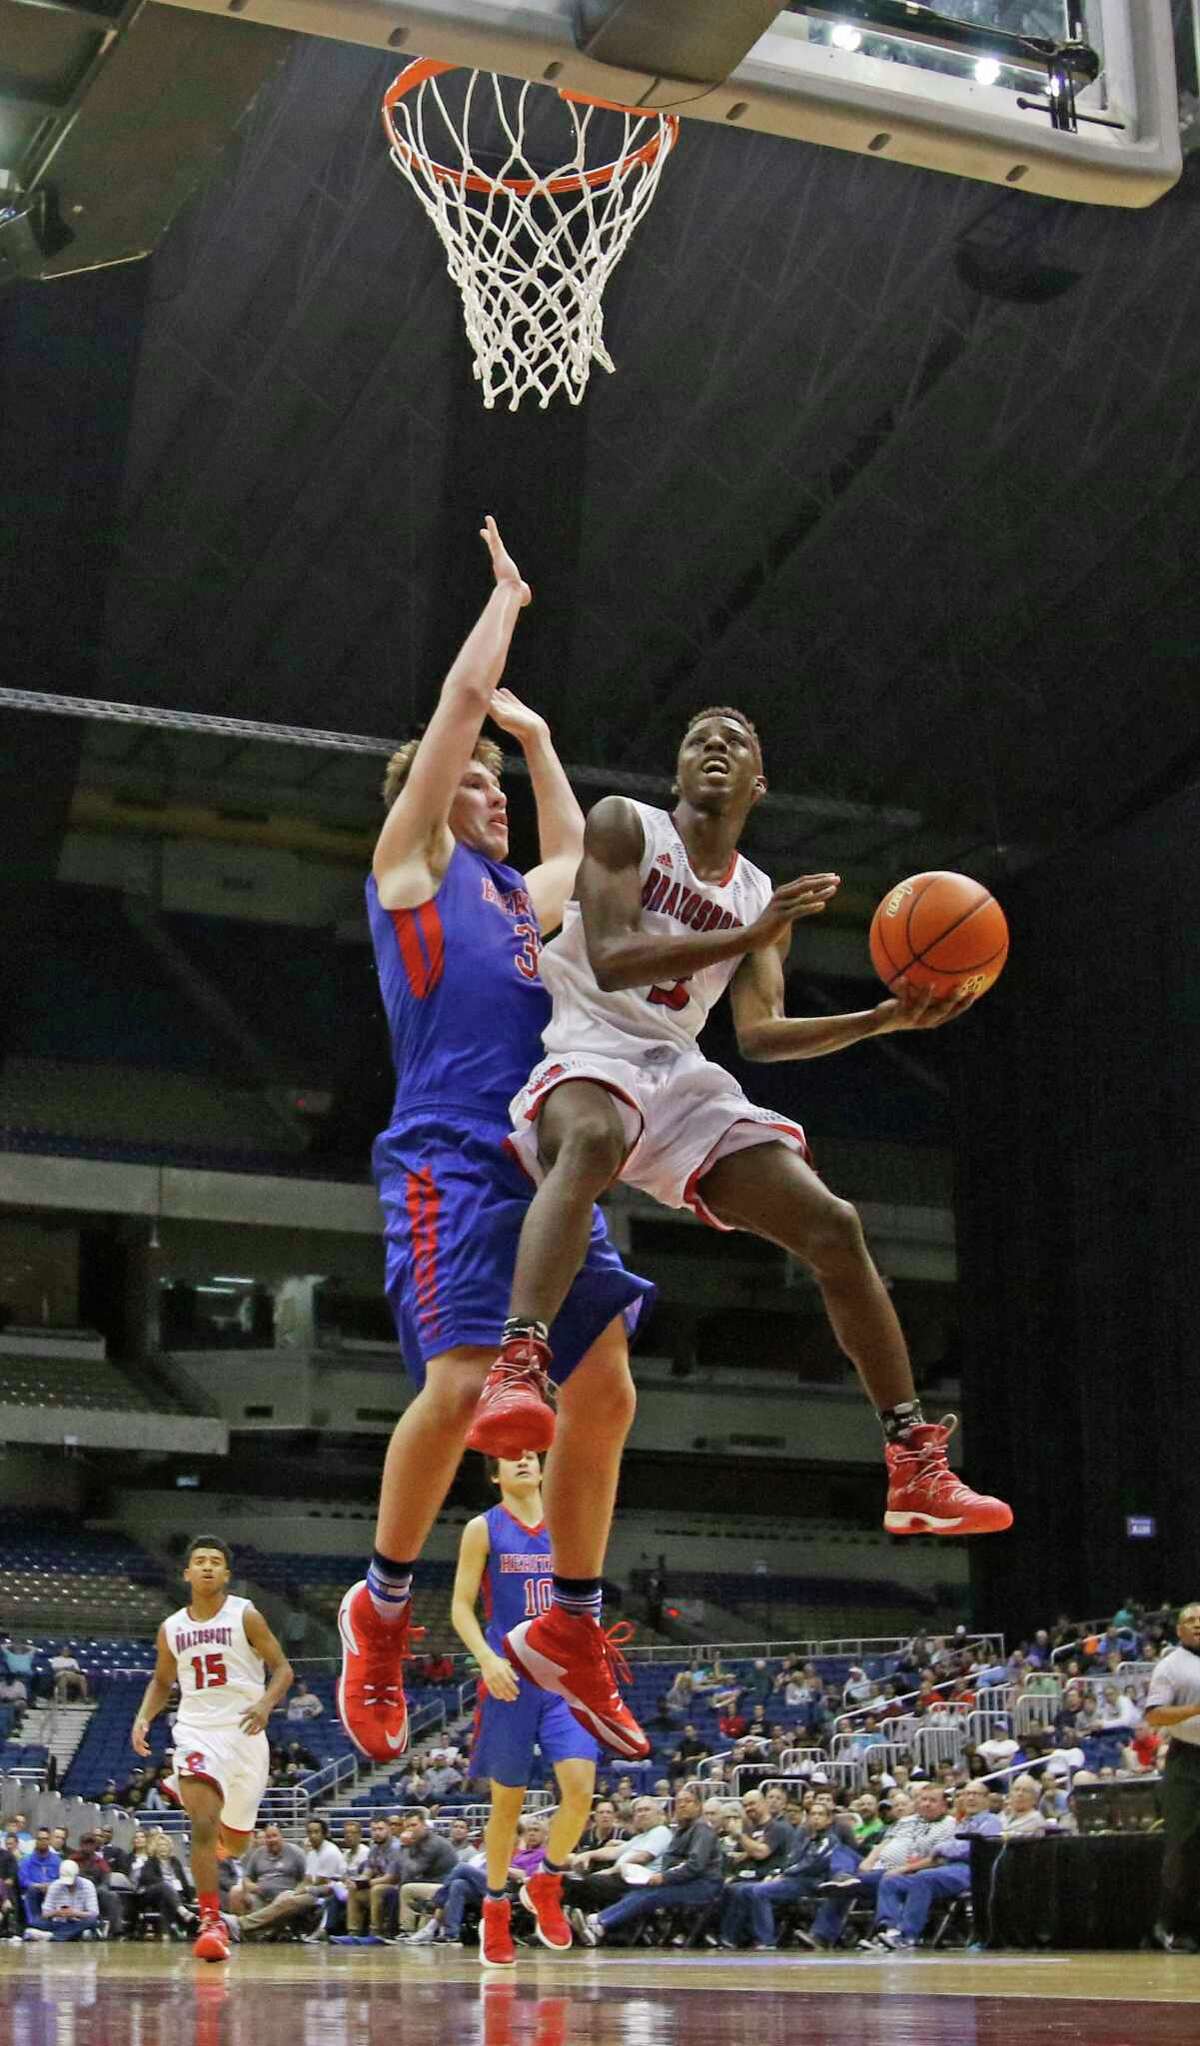 Freeport Brazoport's Jalen Johnson (3) drives on Midlothian Heritage player from 4A semi-final game between Freeport Brazosport vs. Midlothian Heritage on Friday, March 10, 2017 at the Alamodome.